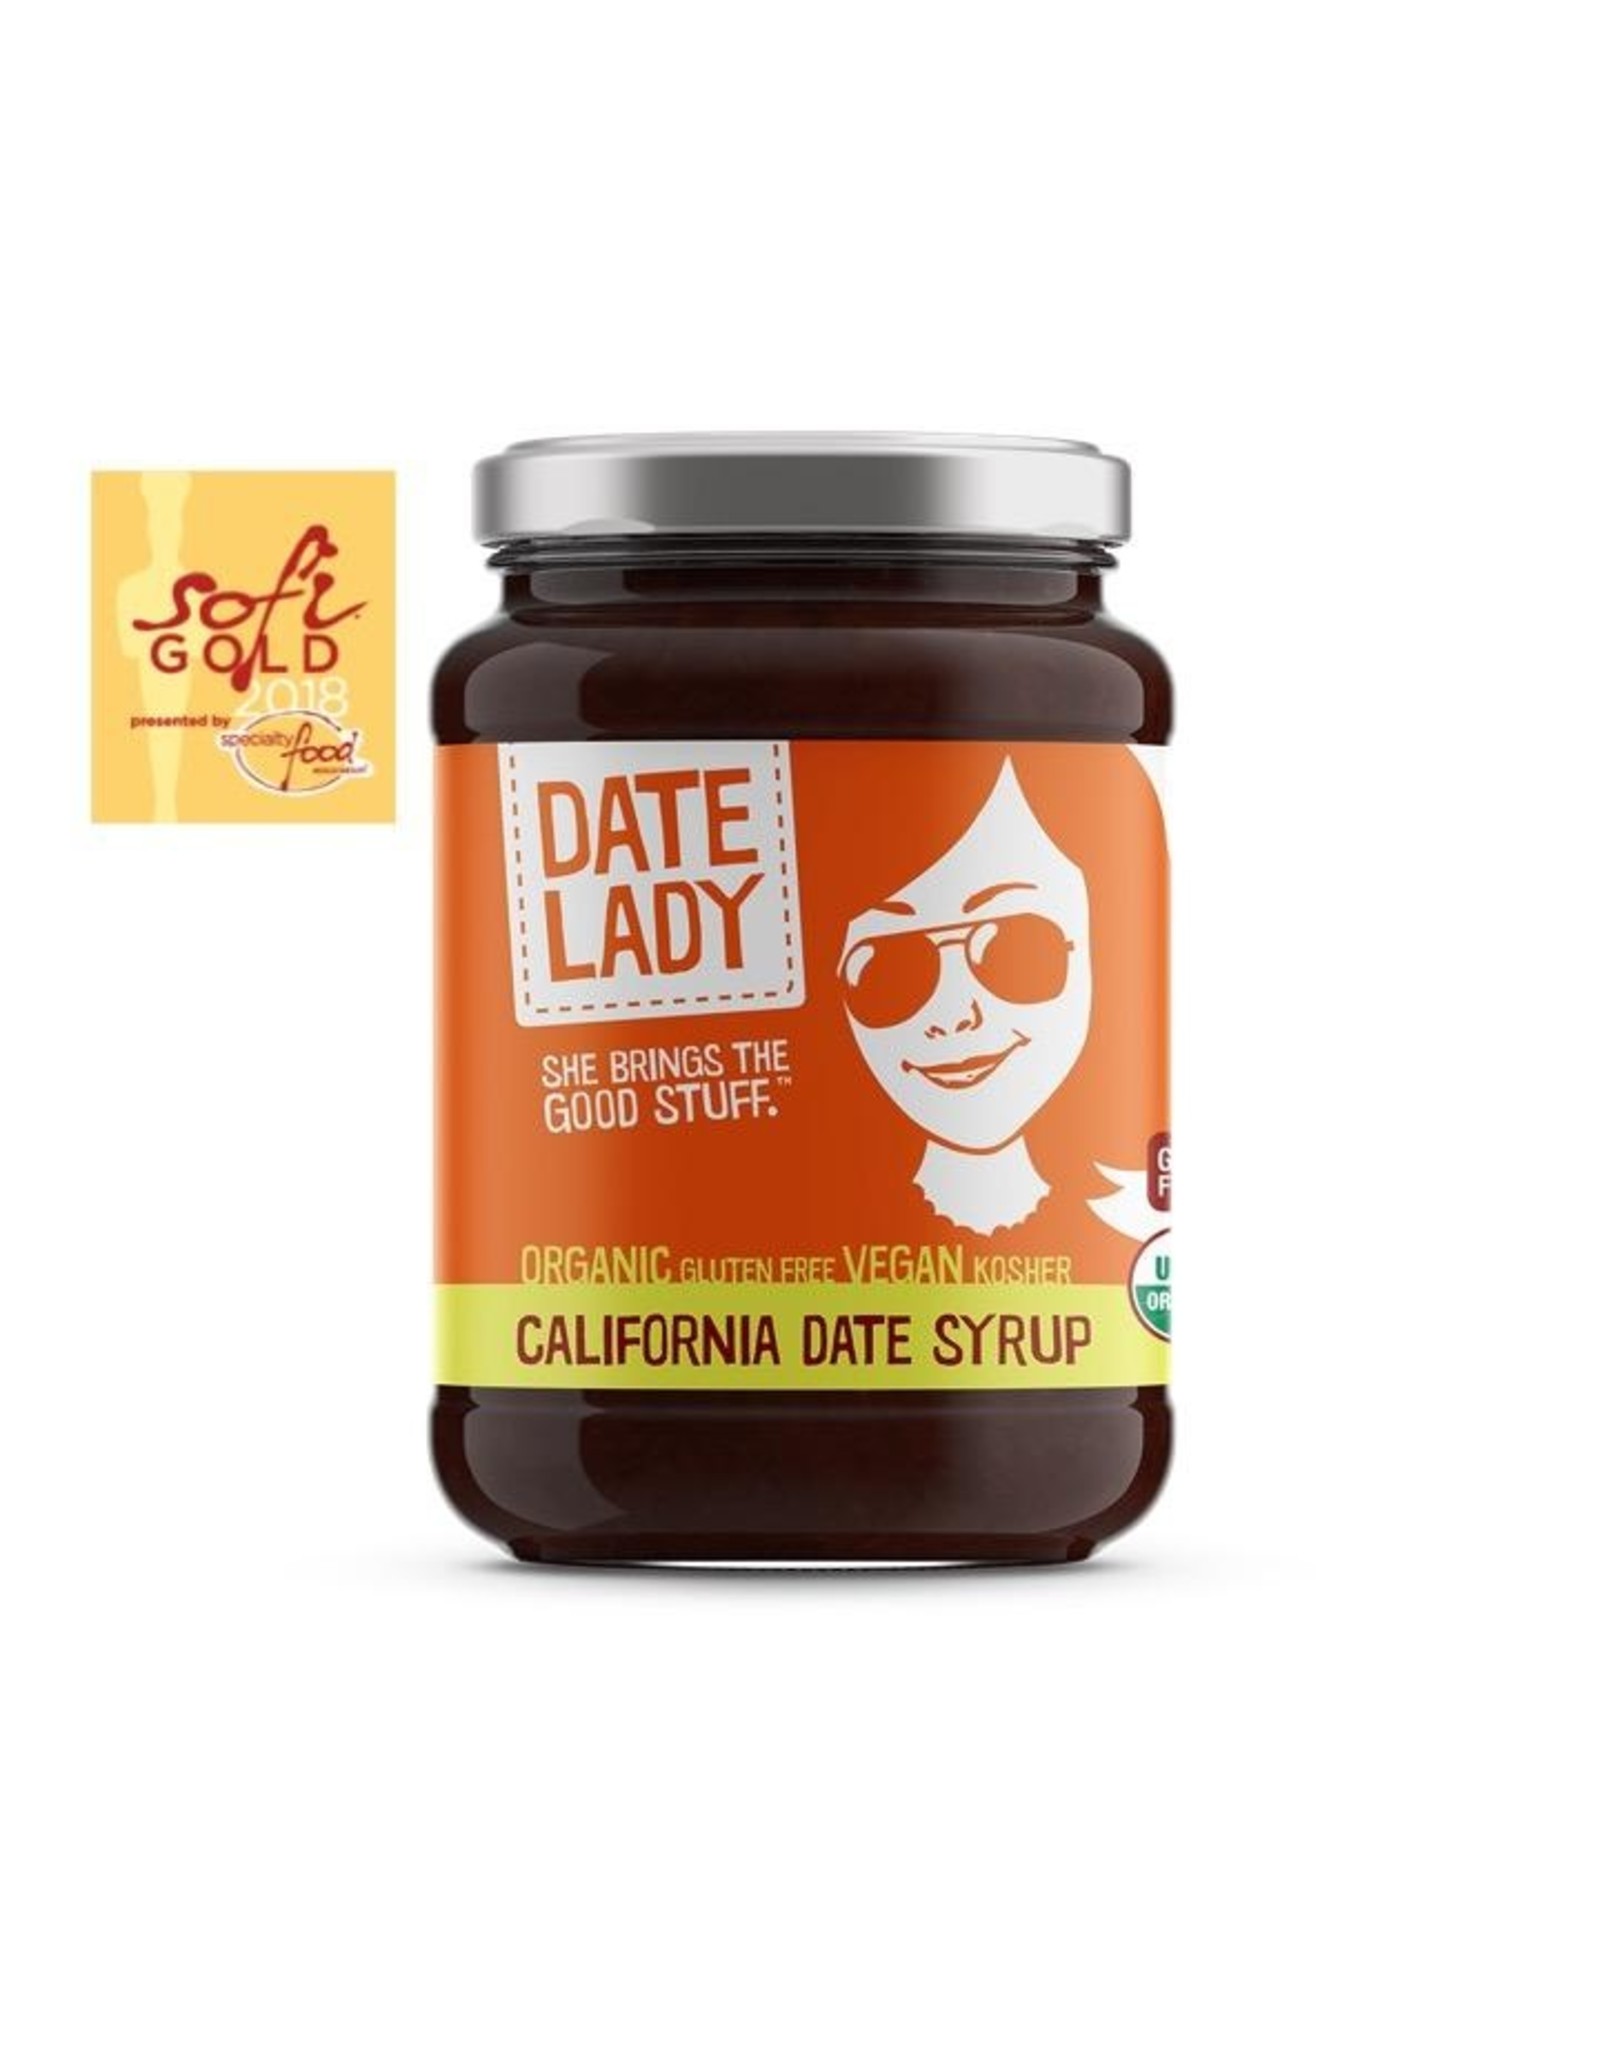 Date Lady Date Lady California Date Syrup